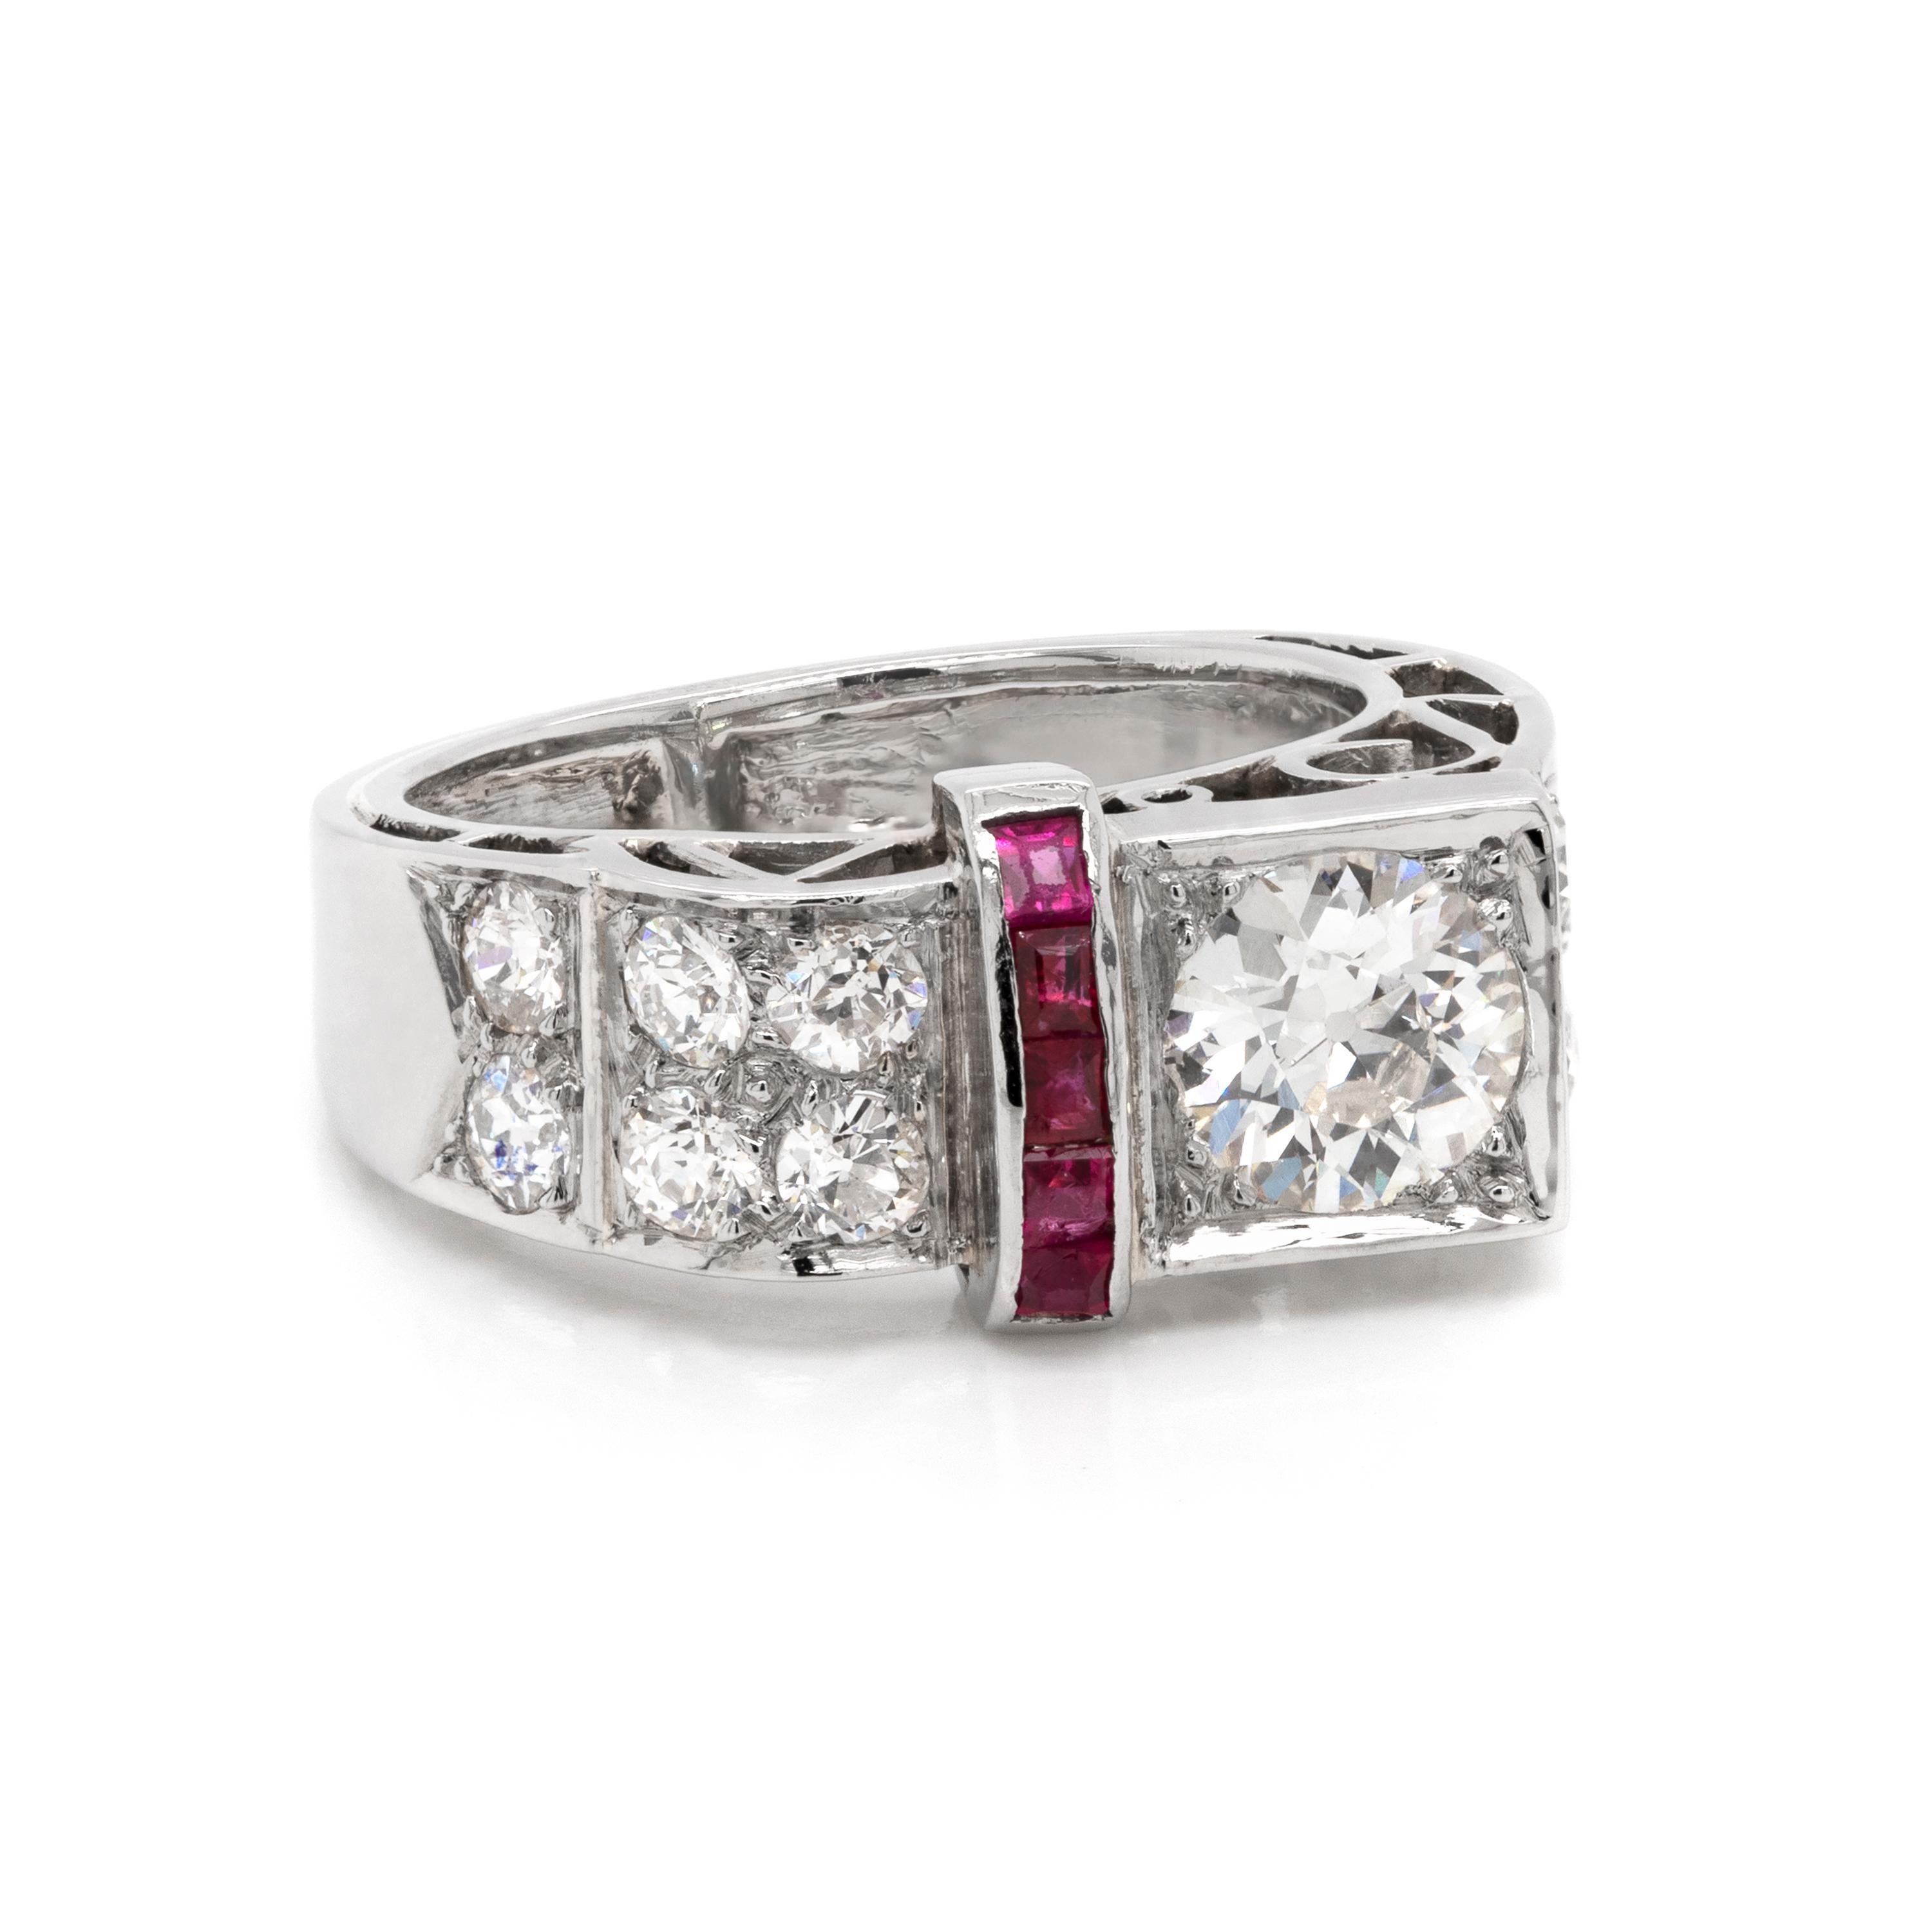 This one of a kind Art Deco style ring is unique in its shape, designed at an angle with scrolled open work details. It features an old European cut diamond weighing 0.83ct pavé set on its front edge, accompanied by a contrasting vertical line of 5